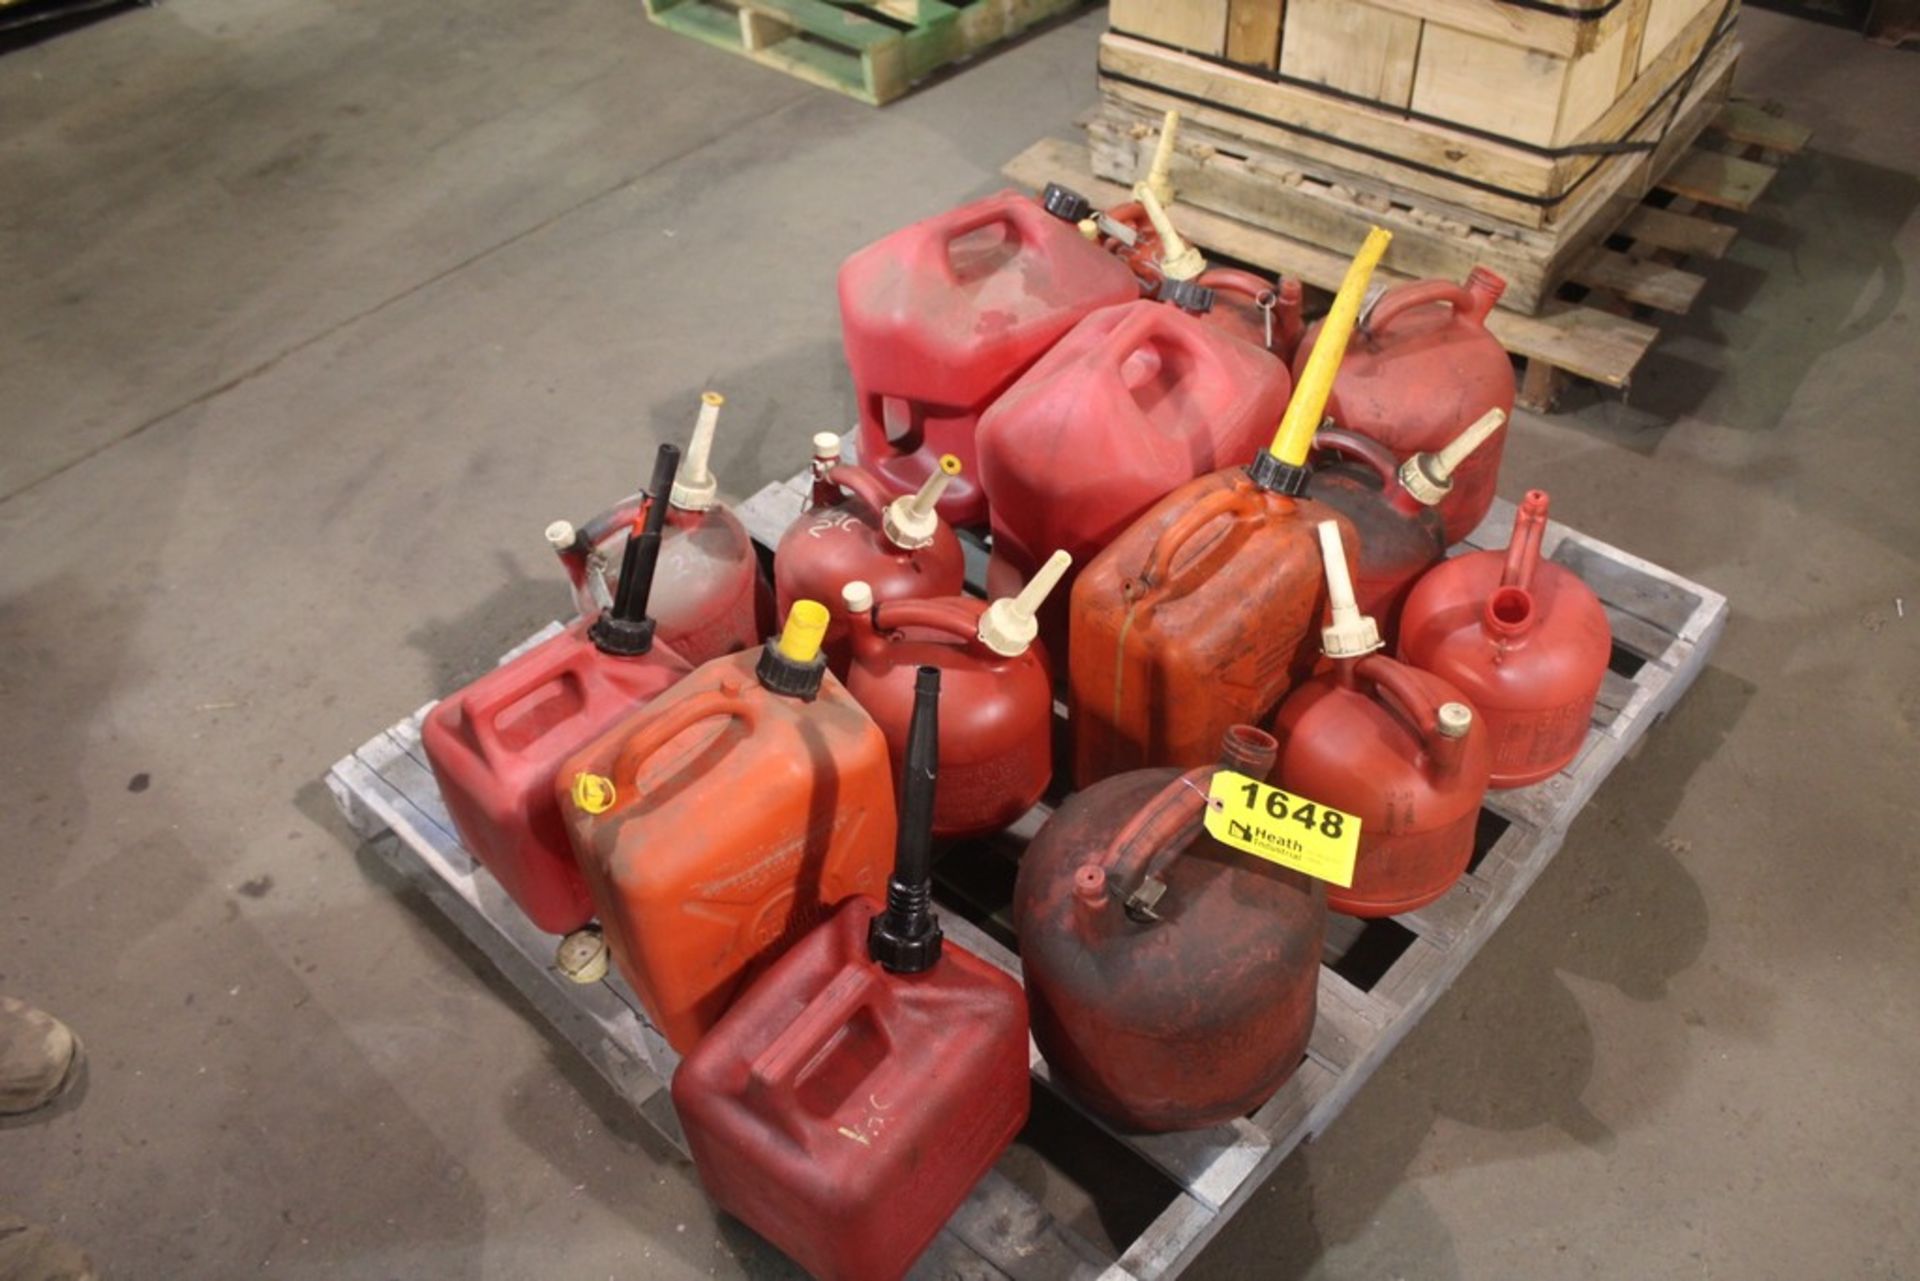 LARGE QTY OF GAS CANS